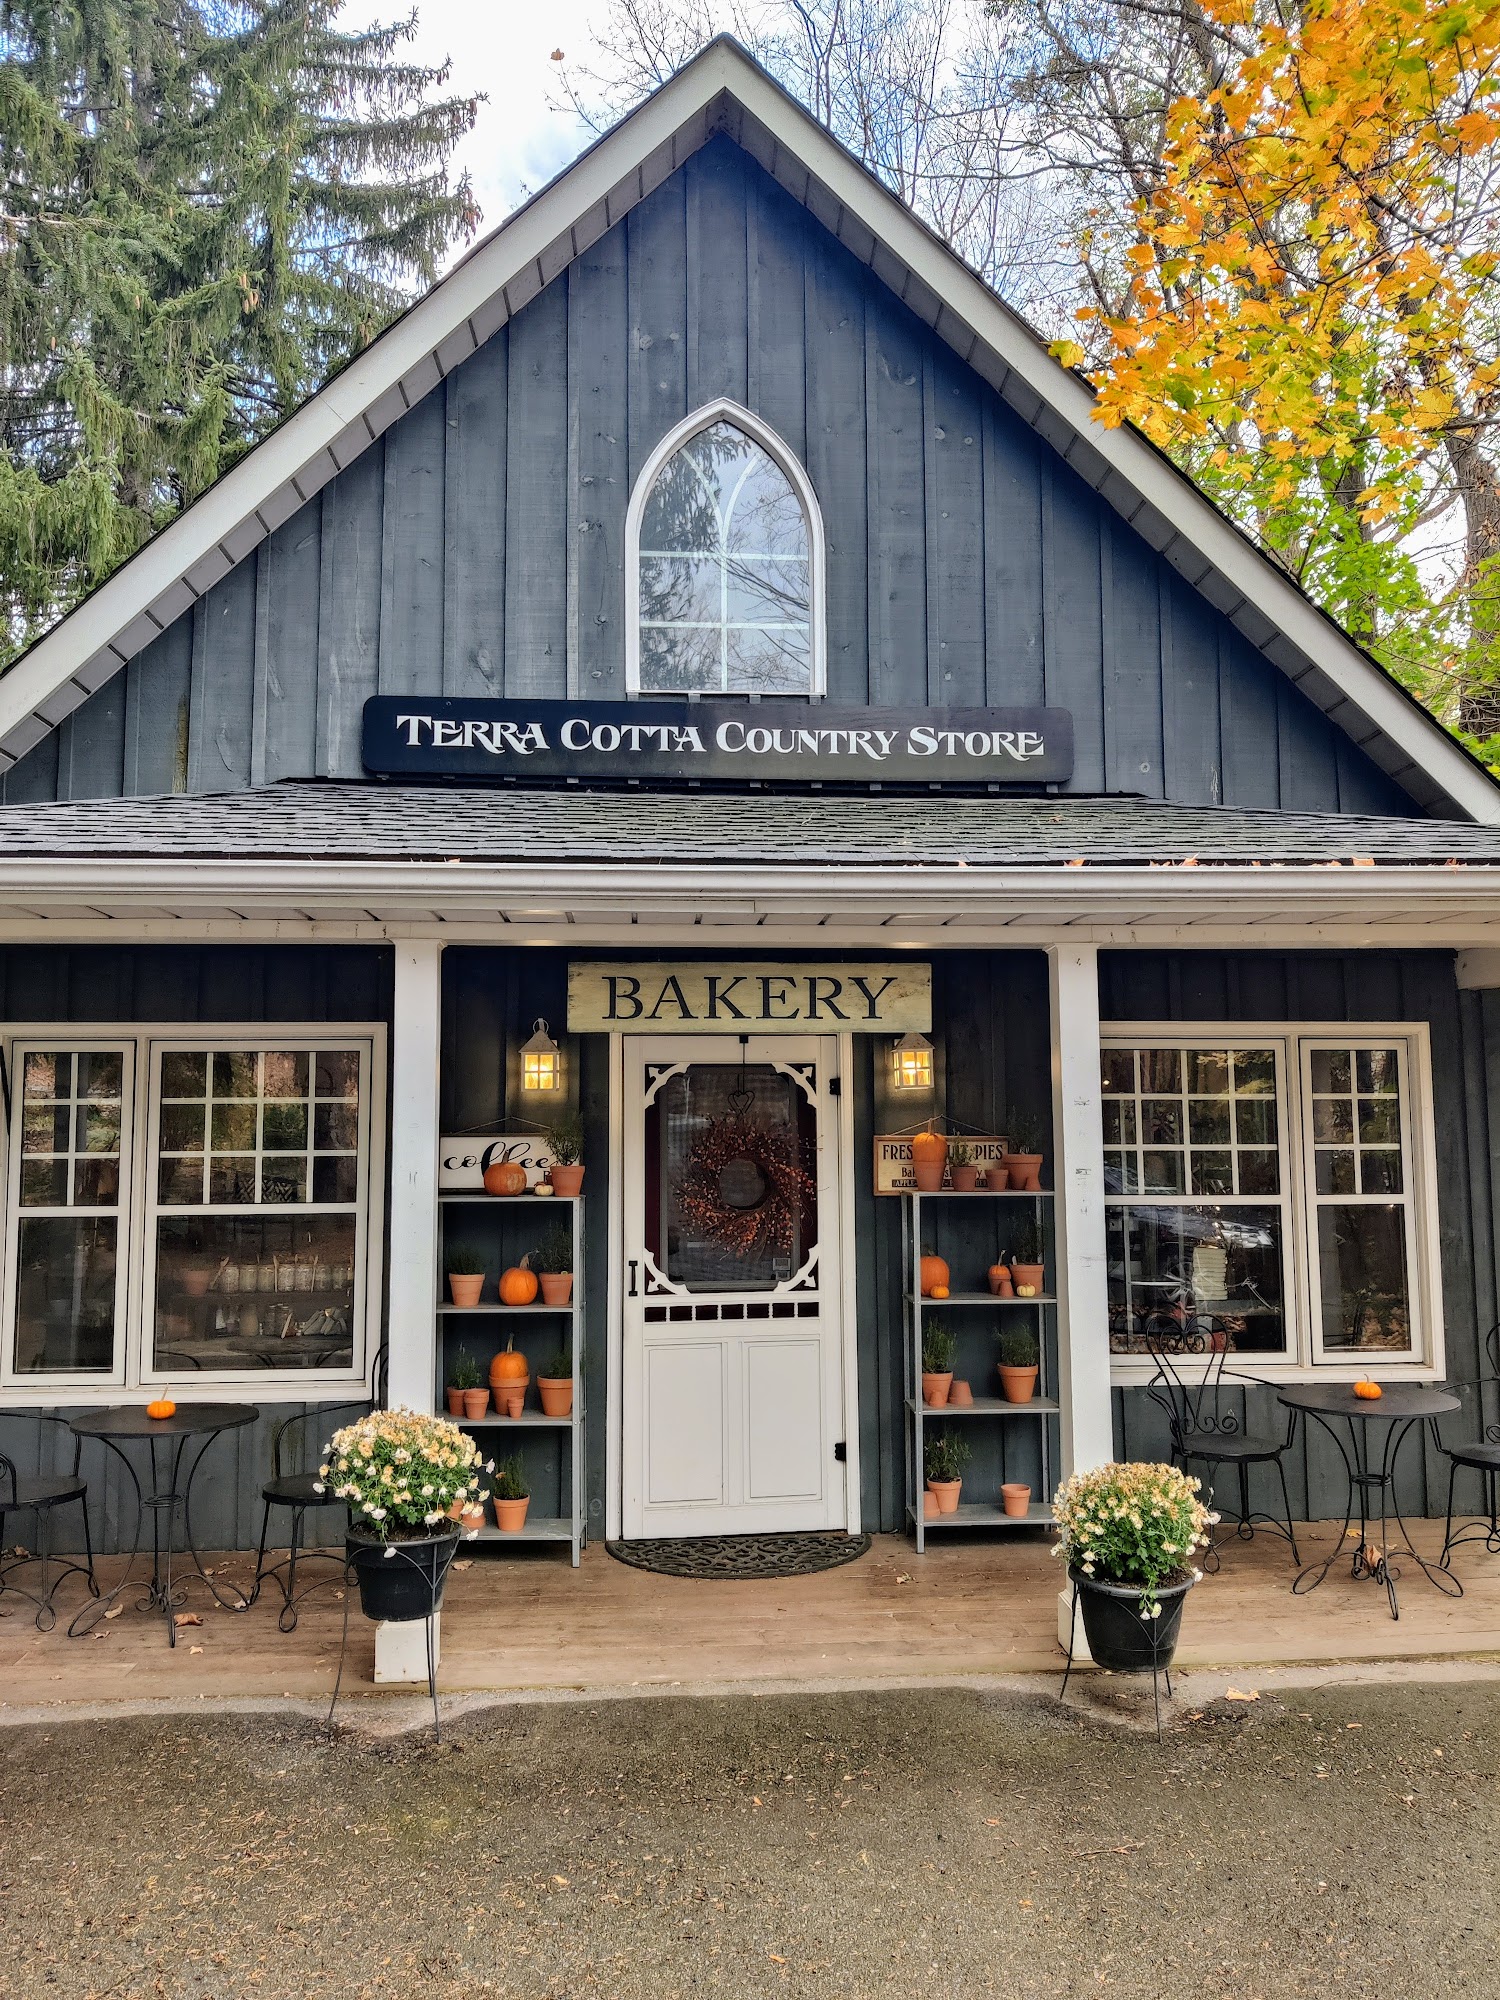 Terra Cotta Country Store